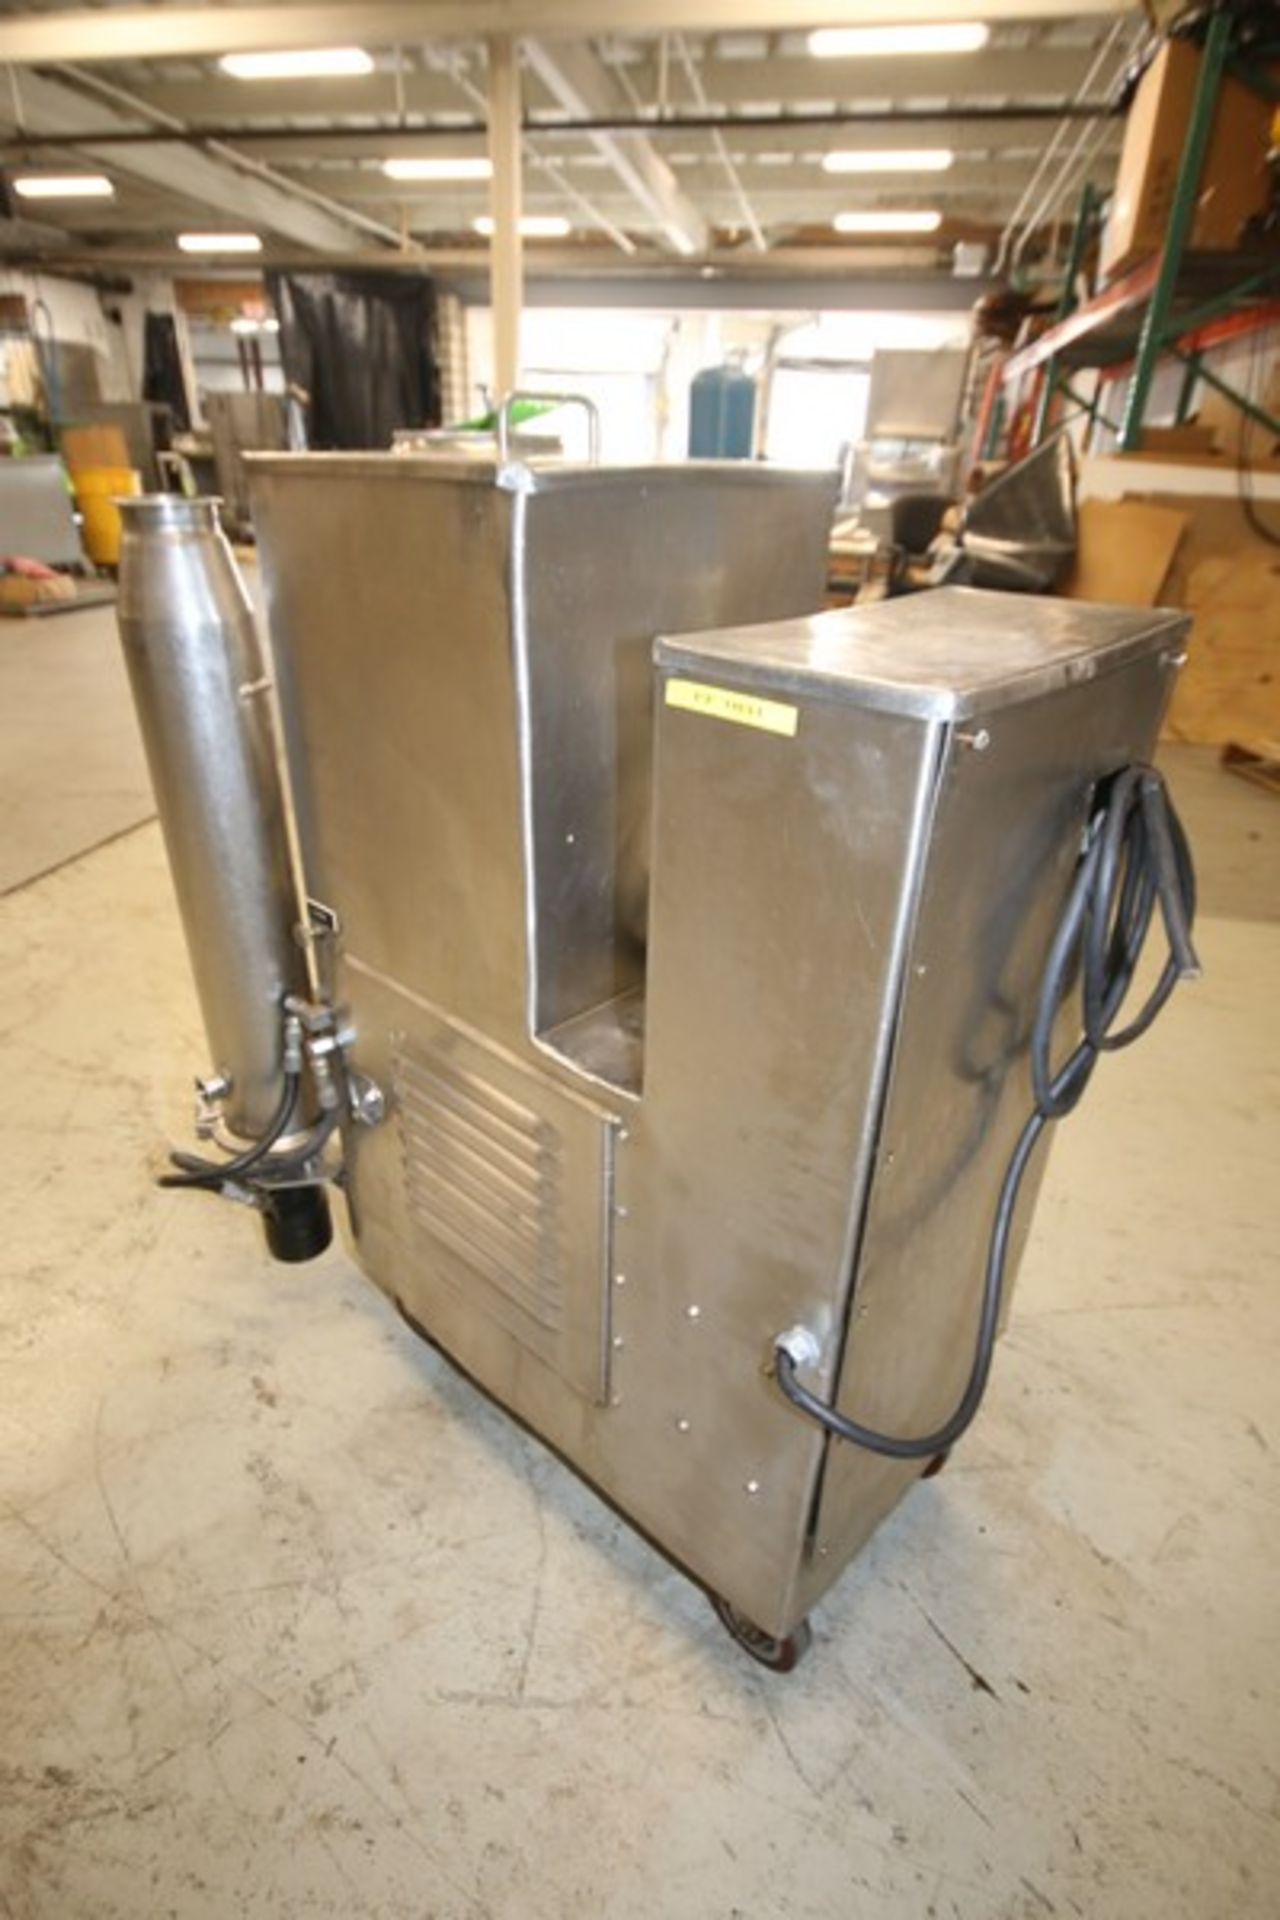 Crepaco S/S Ingredient Feeder / Fruit Feeder, Model FF, SN 1831 (INV#87094)(Located @ the MDG - Image 6 of 7